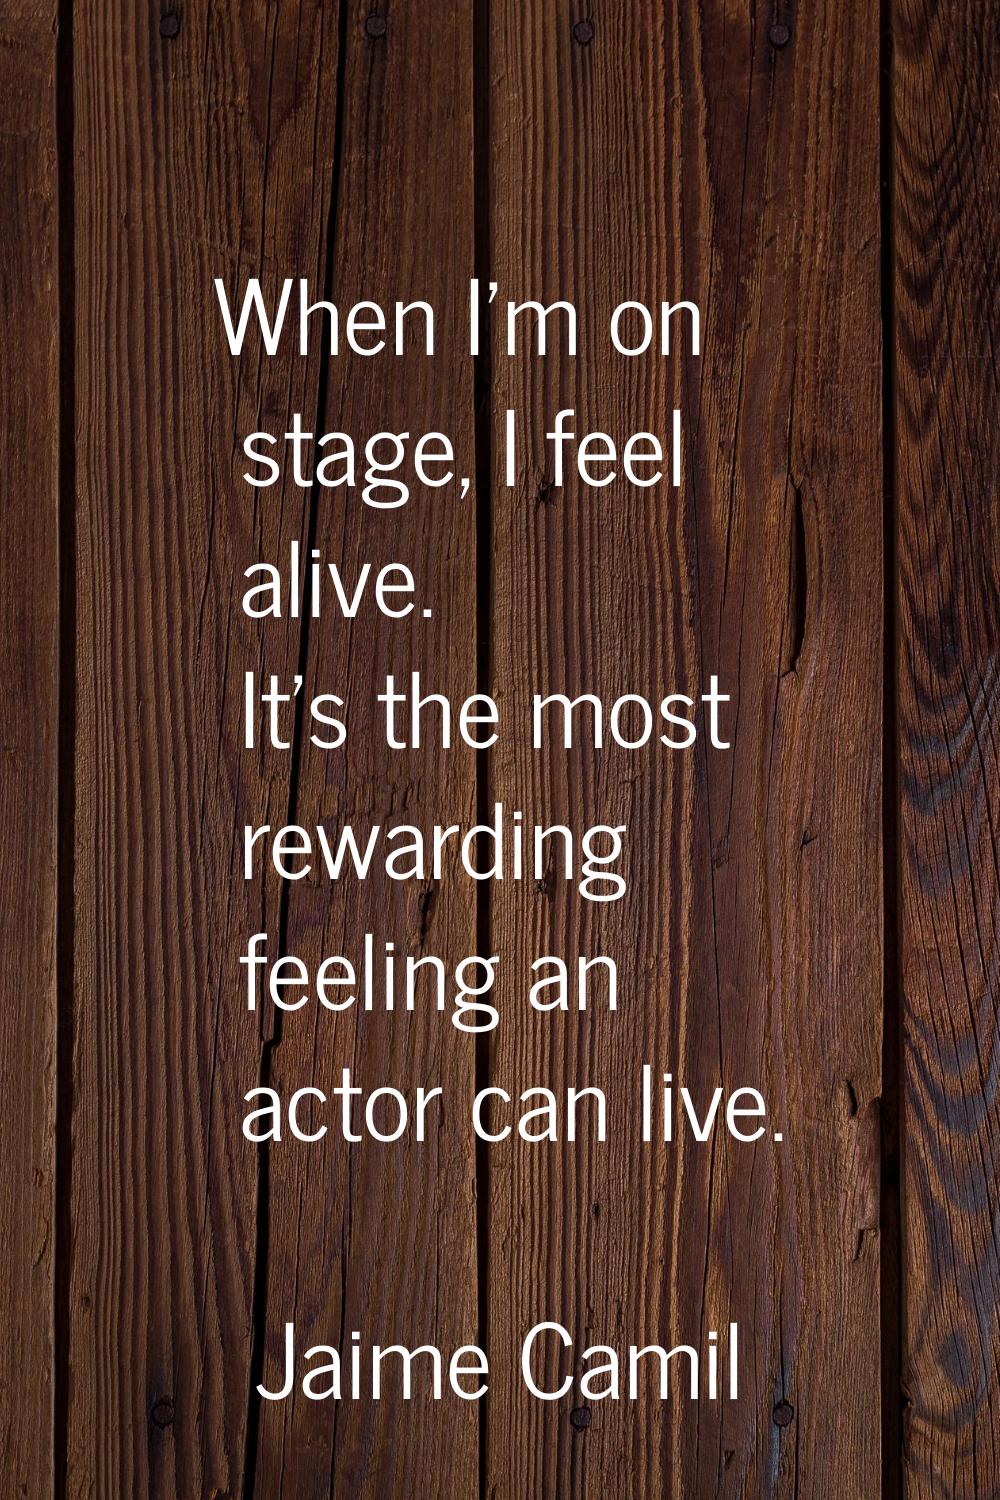 When I'm on stage, I feel alive. It's the most rewarding feeling an actor can live.